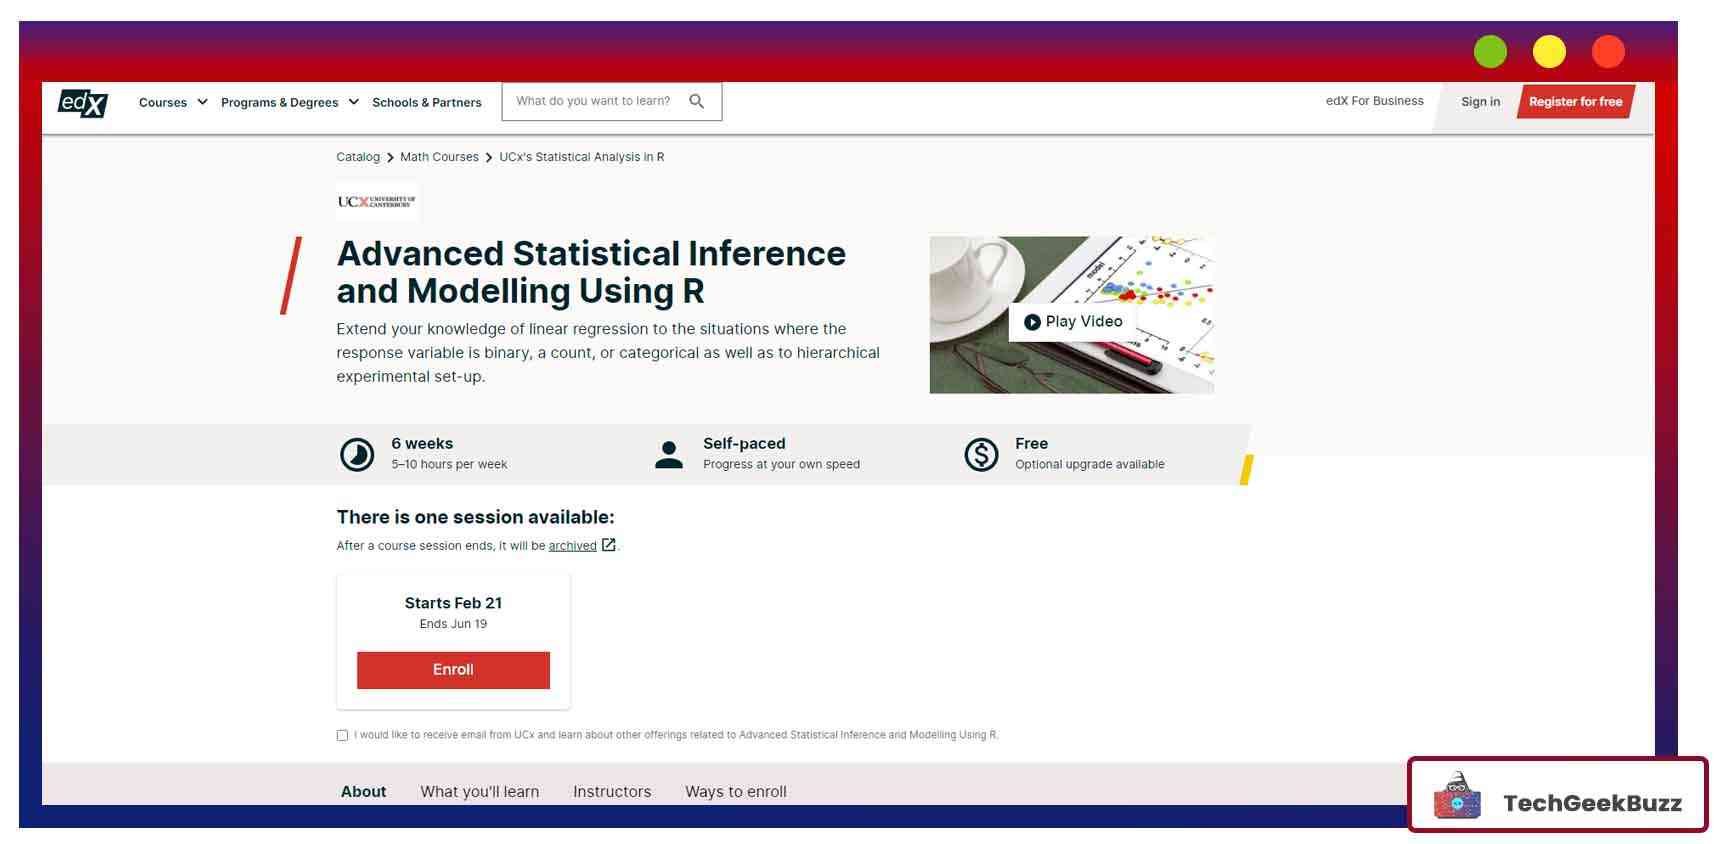 Advanced Statistical Inference and Modelling Using R